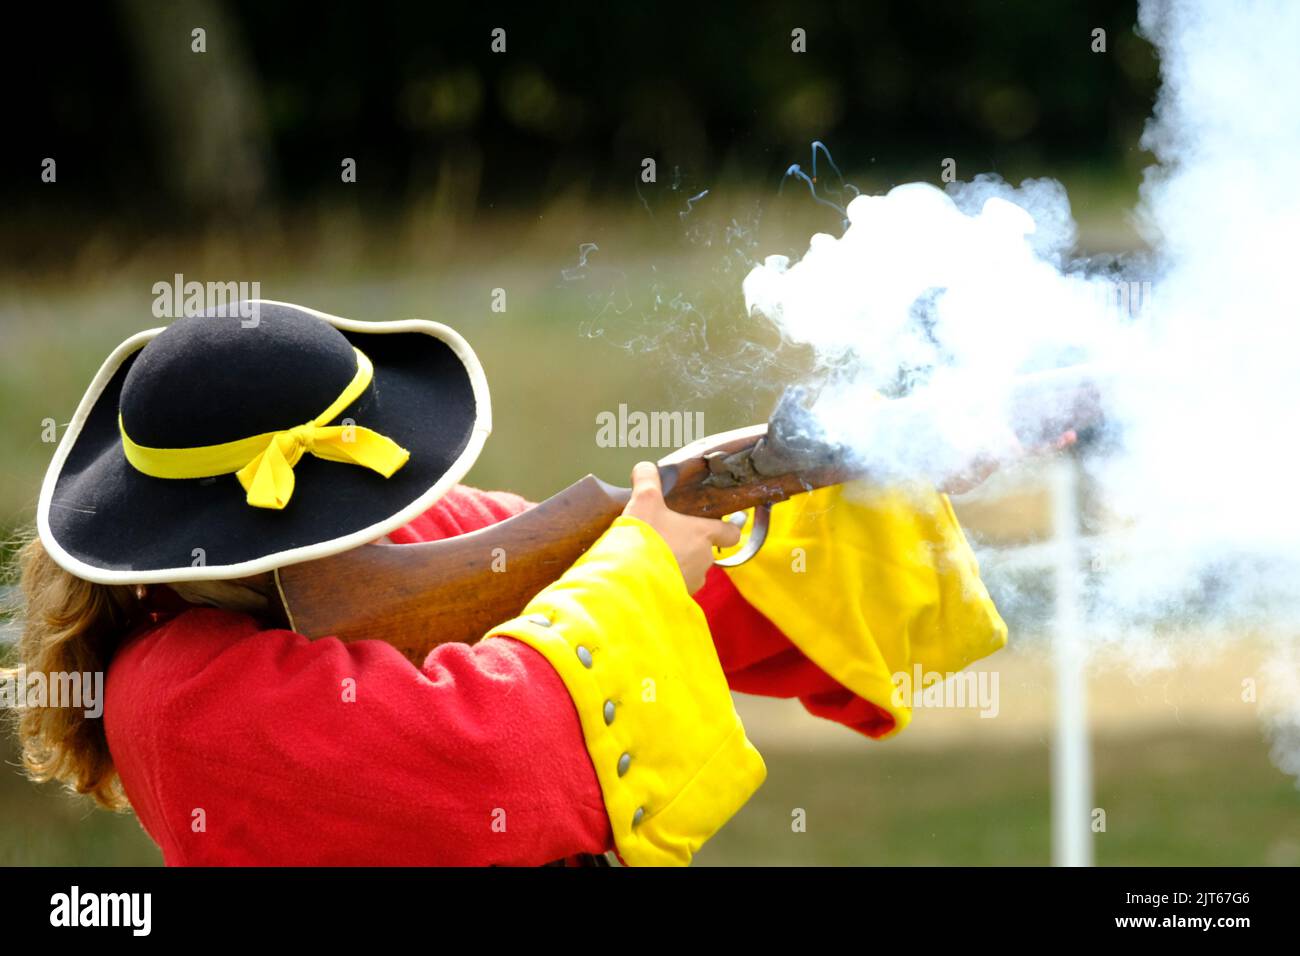 Glastonbury, UK. 28th Aug, 2020. Members of the Taunton Garrison re-enact the 1785 Monmouth Rebellion at Glastonbury Abbey. Taunton Garrison are enthusiasts who provide living history and military demonstrations. Credit: JMF News/ Alamy Live News Stock Photo